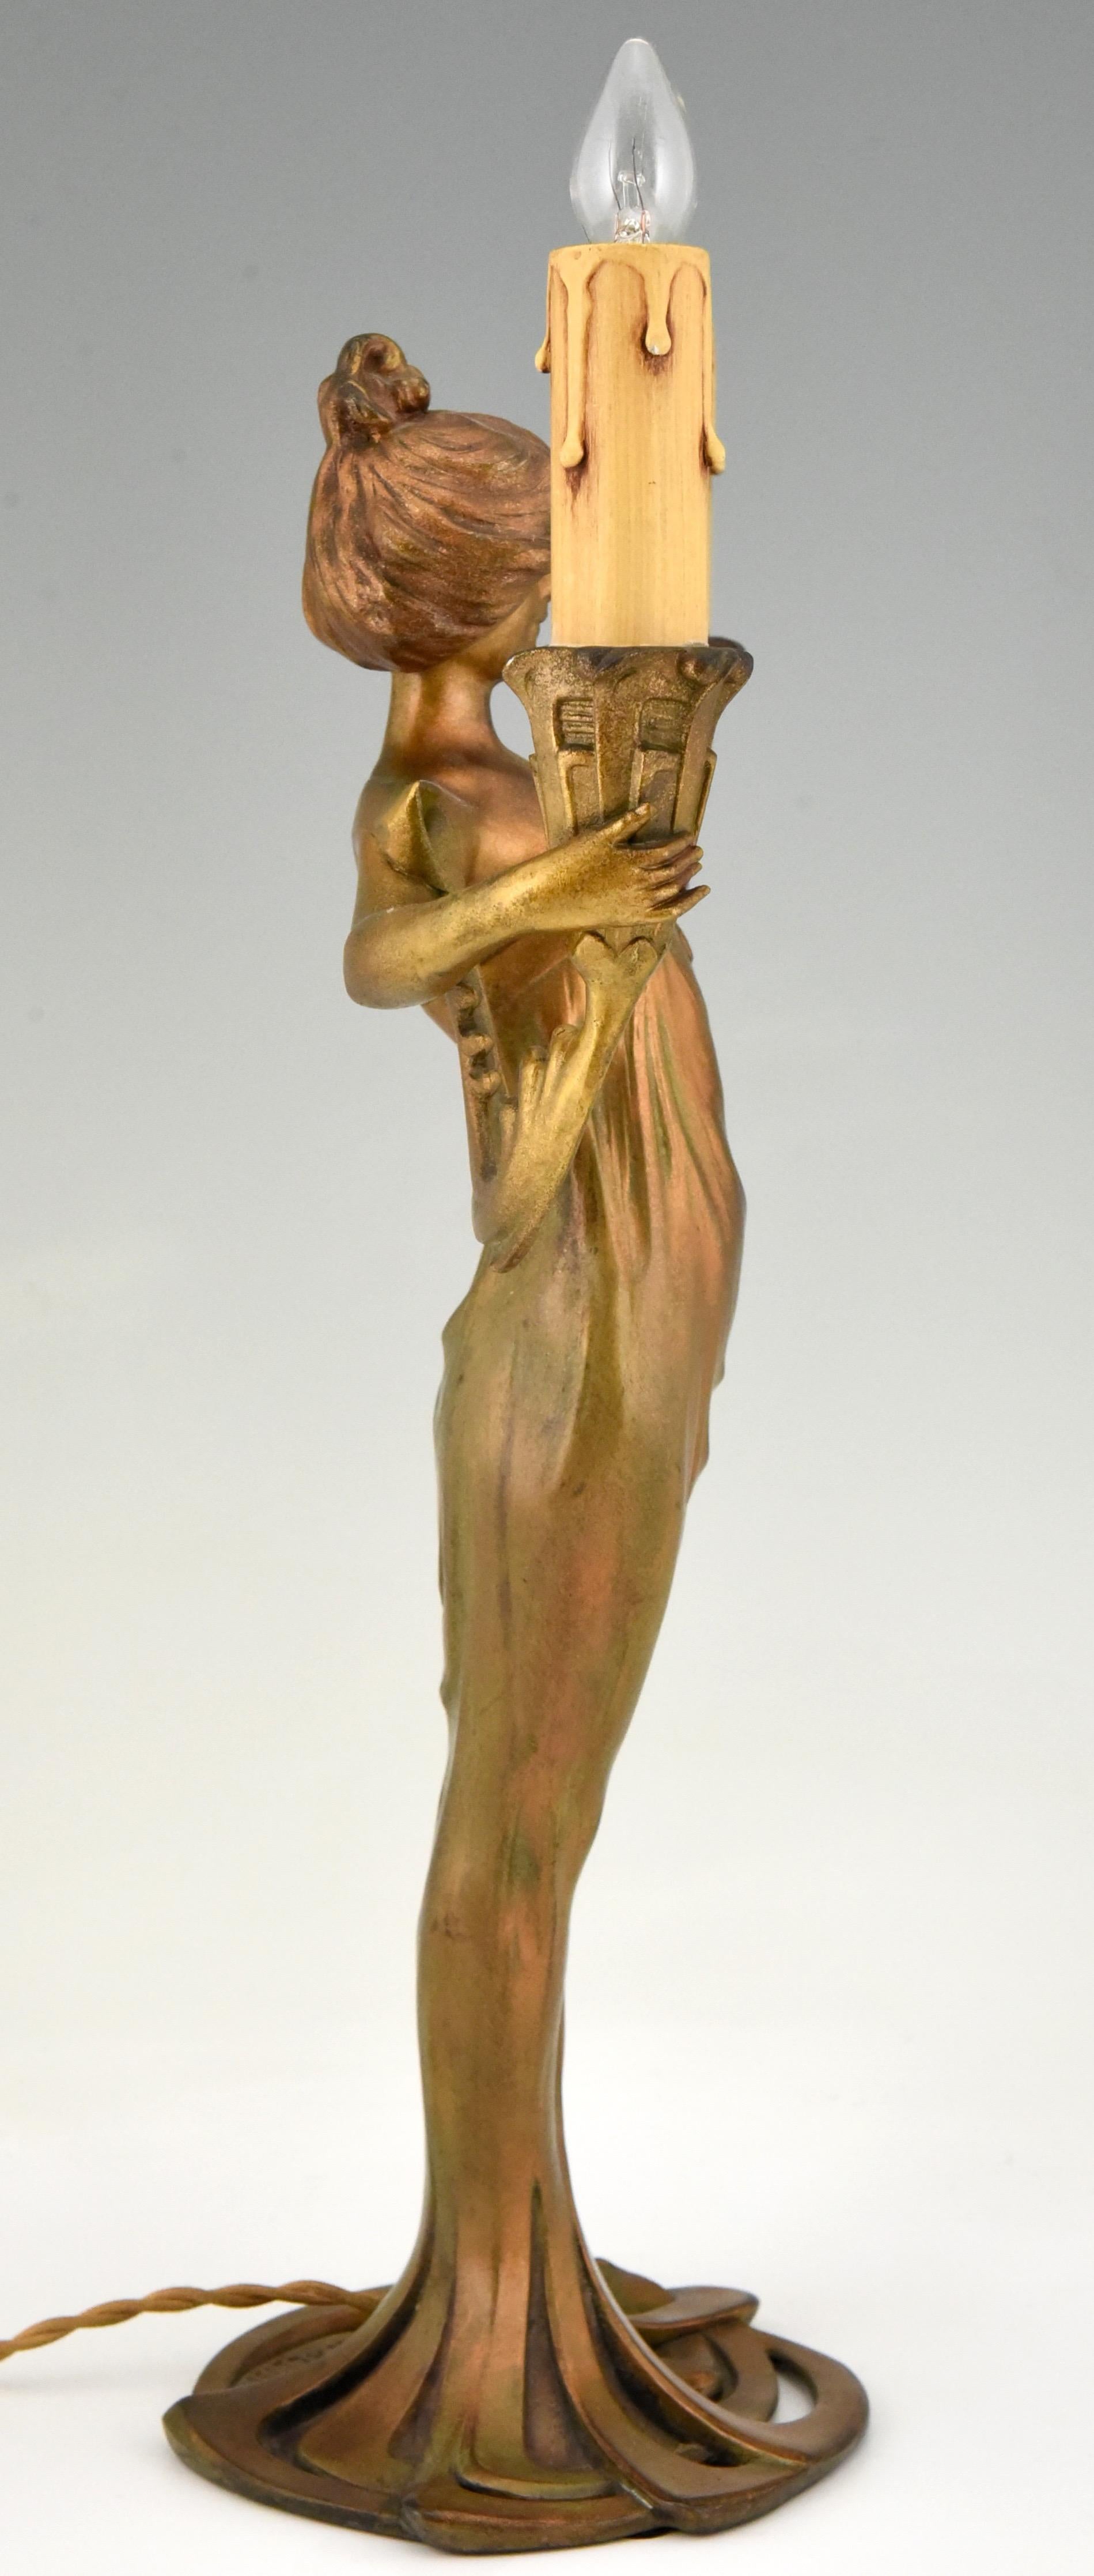 French Art Nouveau Double Light Table Lamp with Lady by Lucien Alliot, 1900